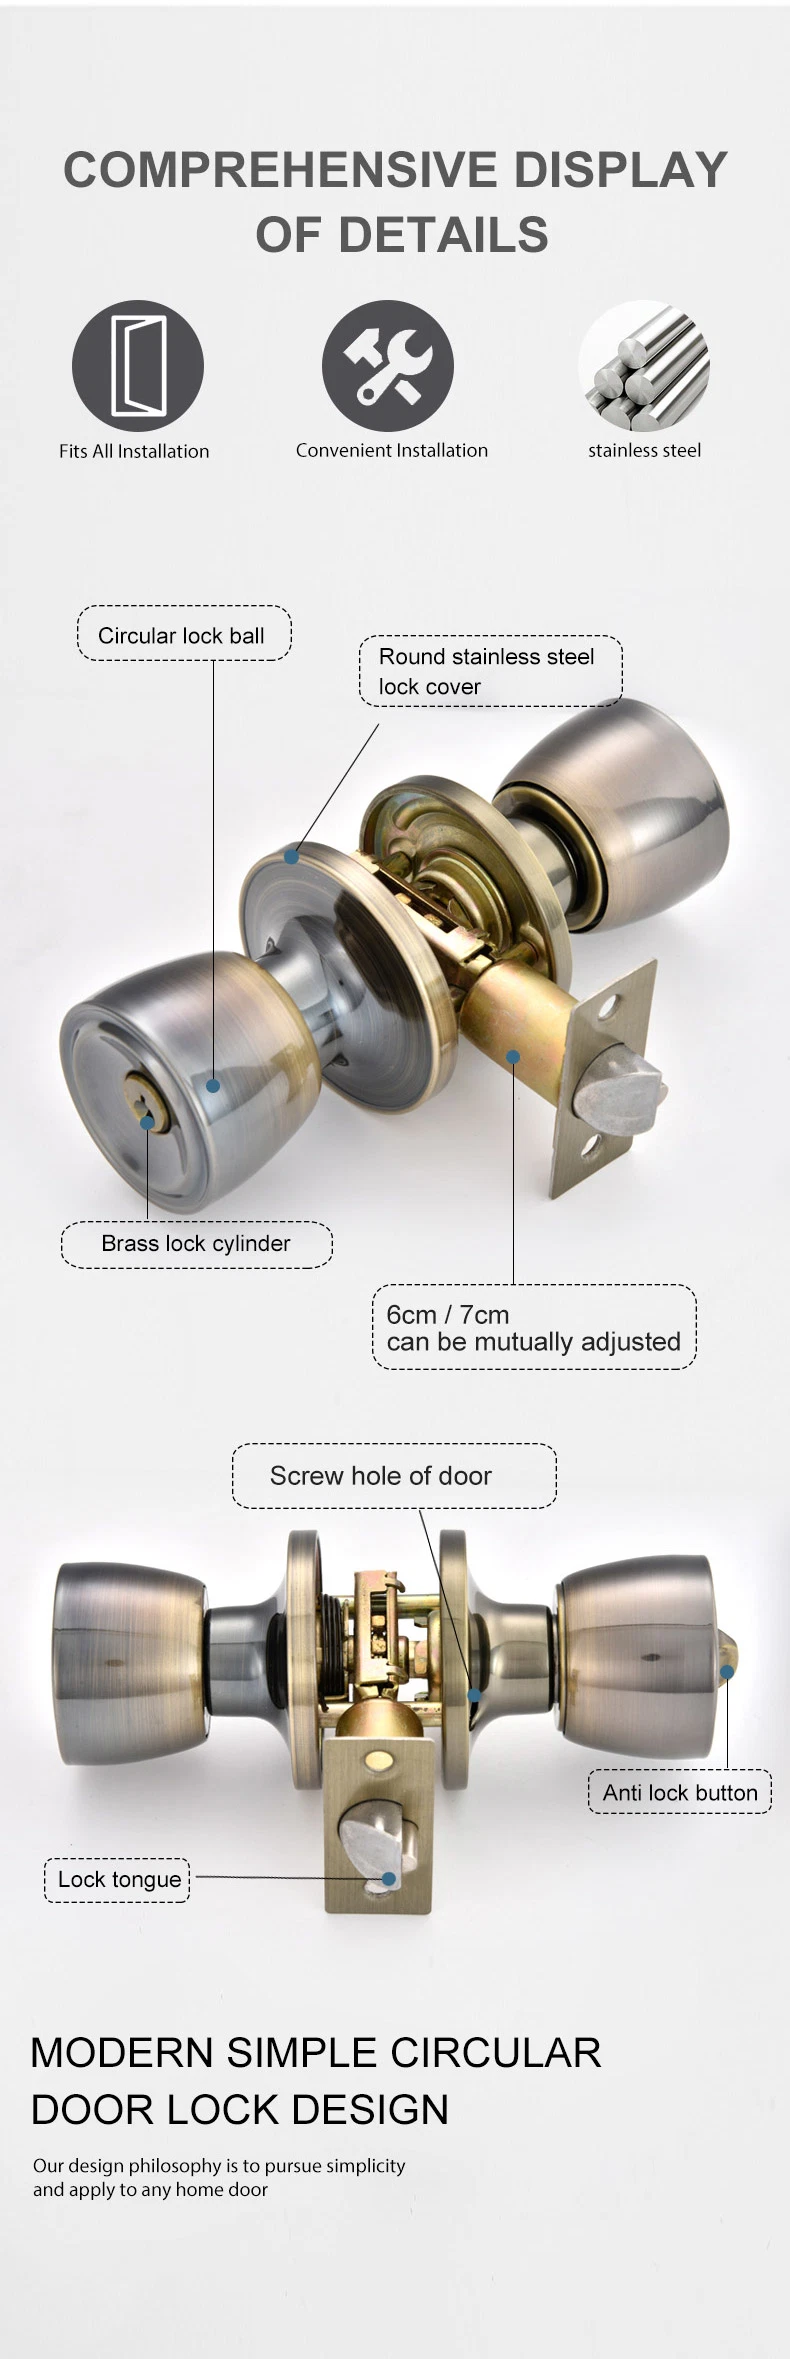 Entry Privacy Round Ball Cylindrical Stainless Steel Cylindrical Door Knob Lock